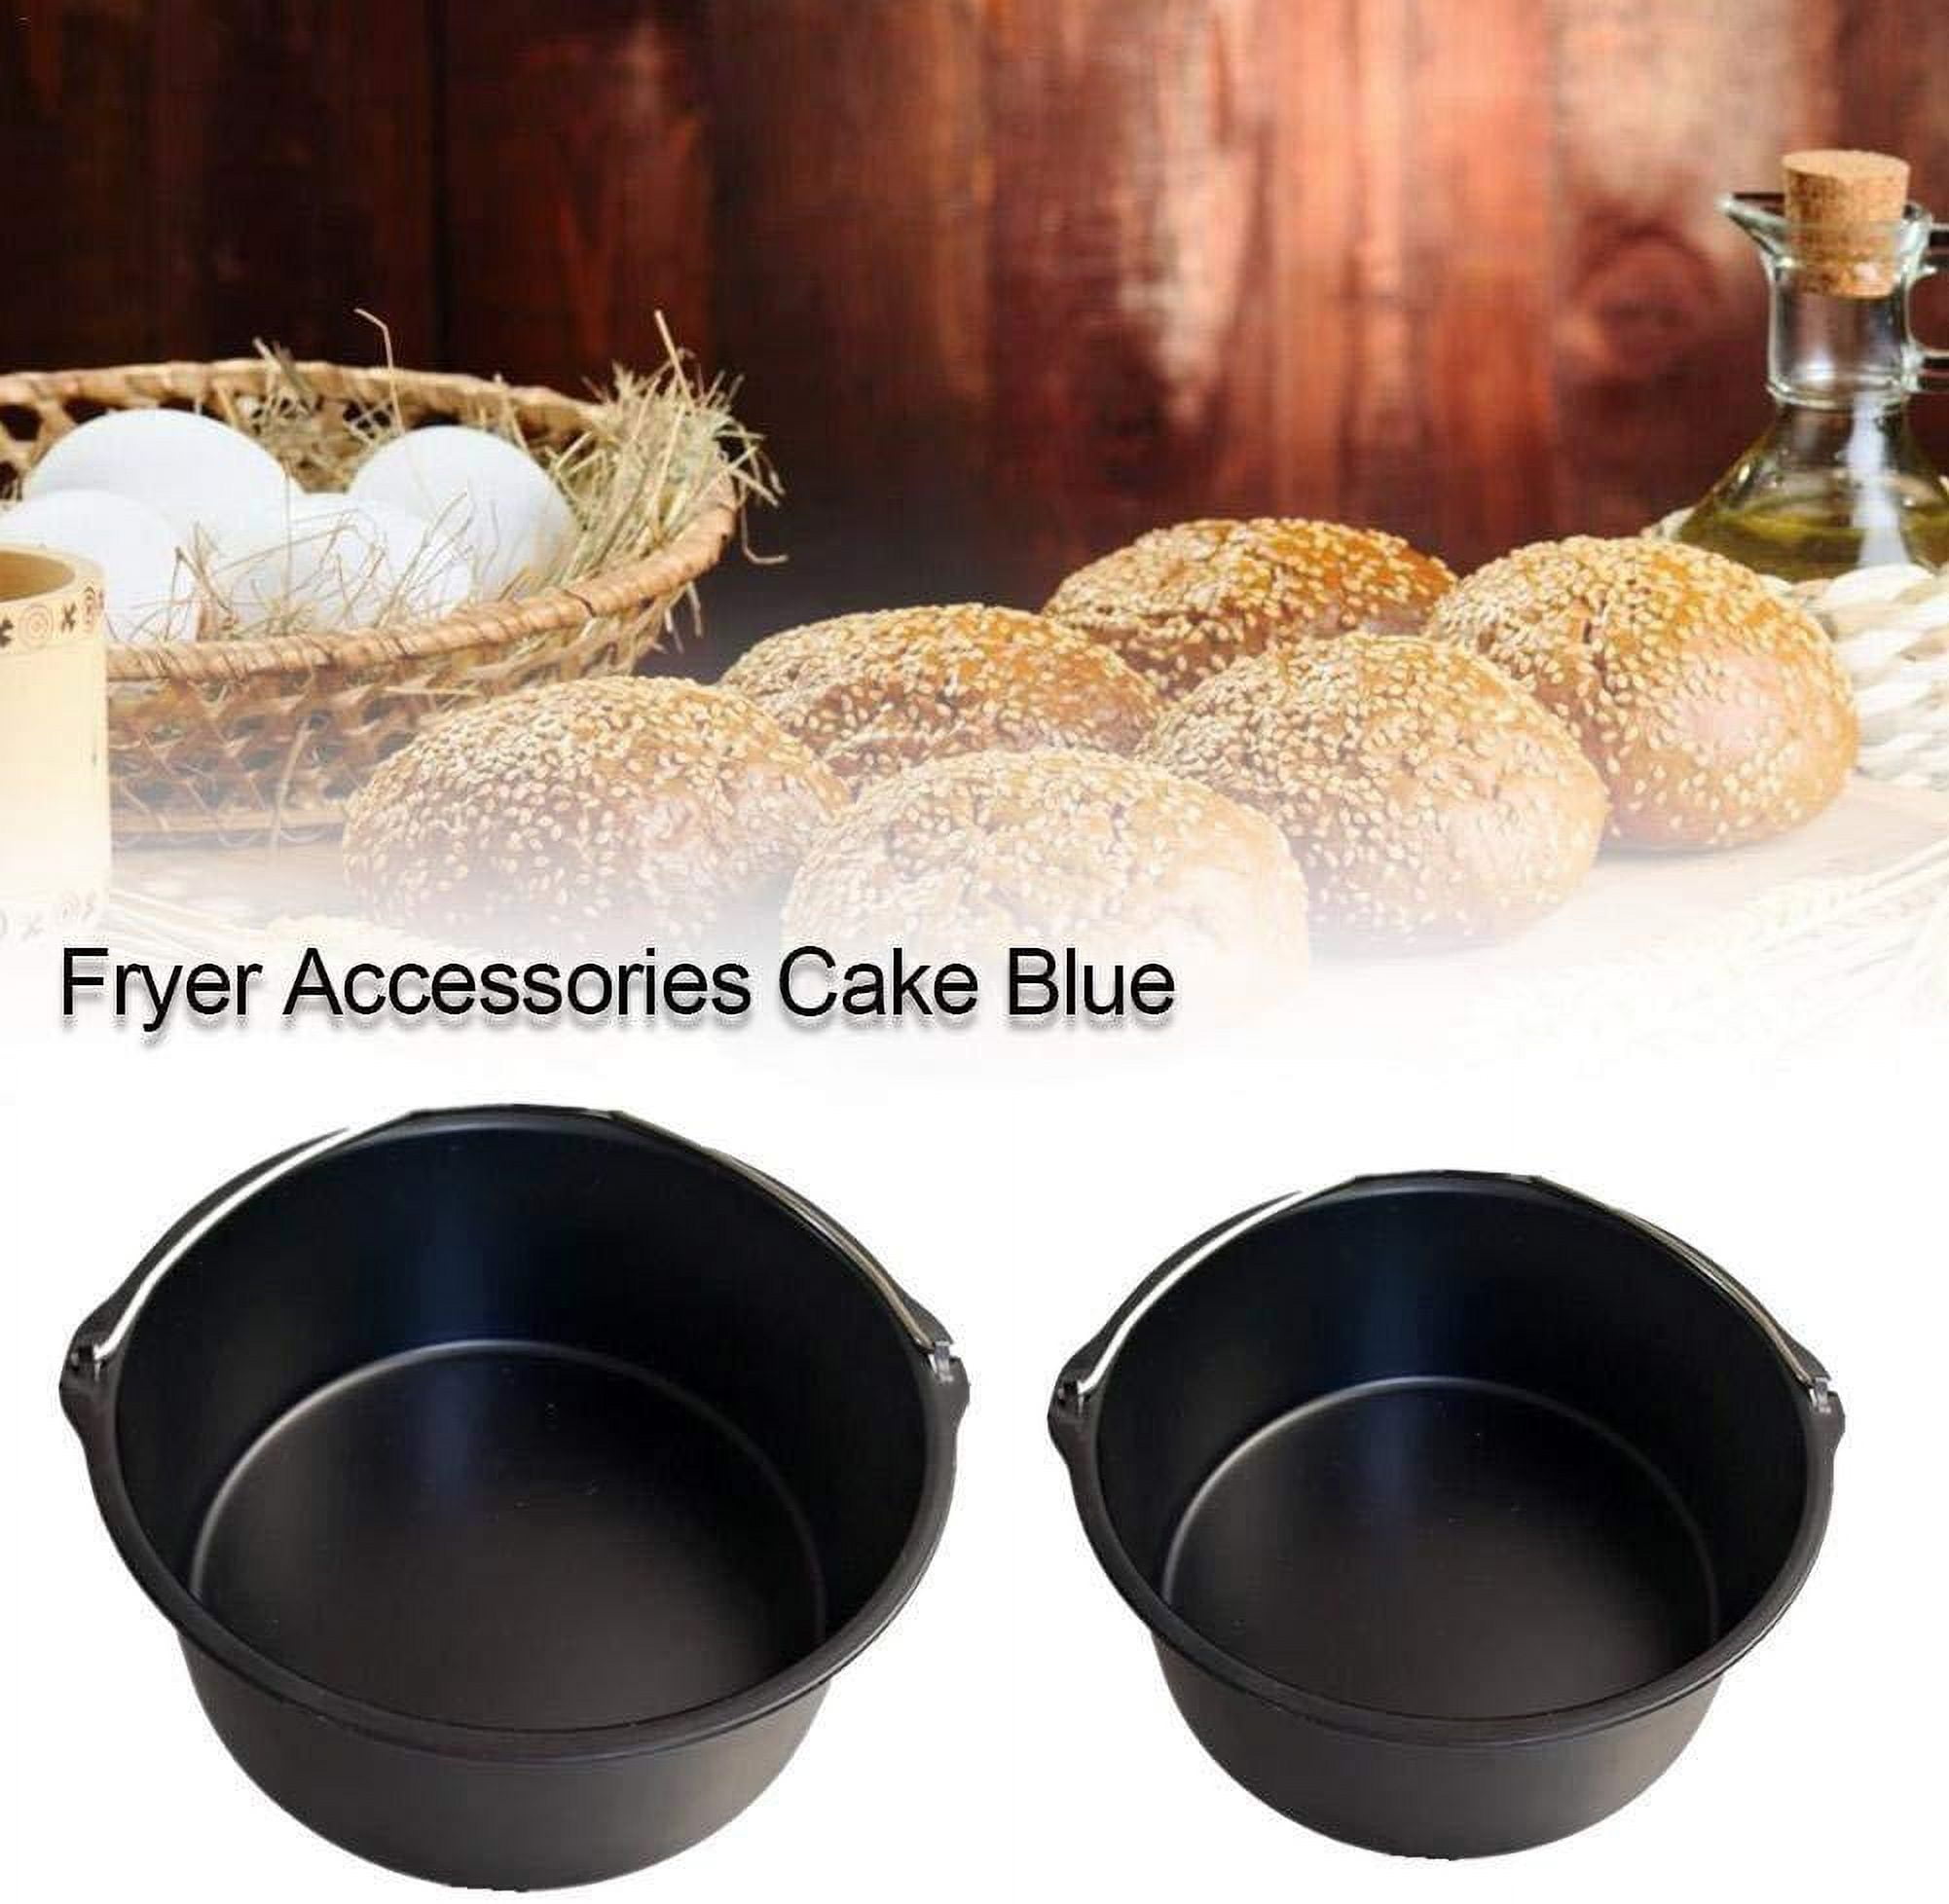  Fujampe Air Fryer Accessories - 8 Inch Cake Pan Set of 14 Pcs  Compatible for Ninja Foodi Cosori instant Pot,Gowise, Fit 4, 4.2, 5, 5.5,  5.8 QT, 6QT Accessories for Air